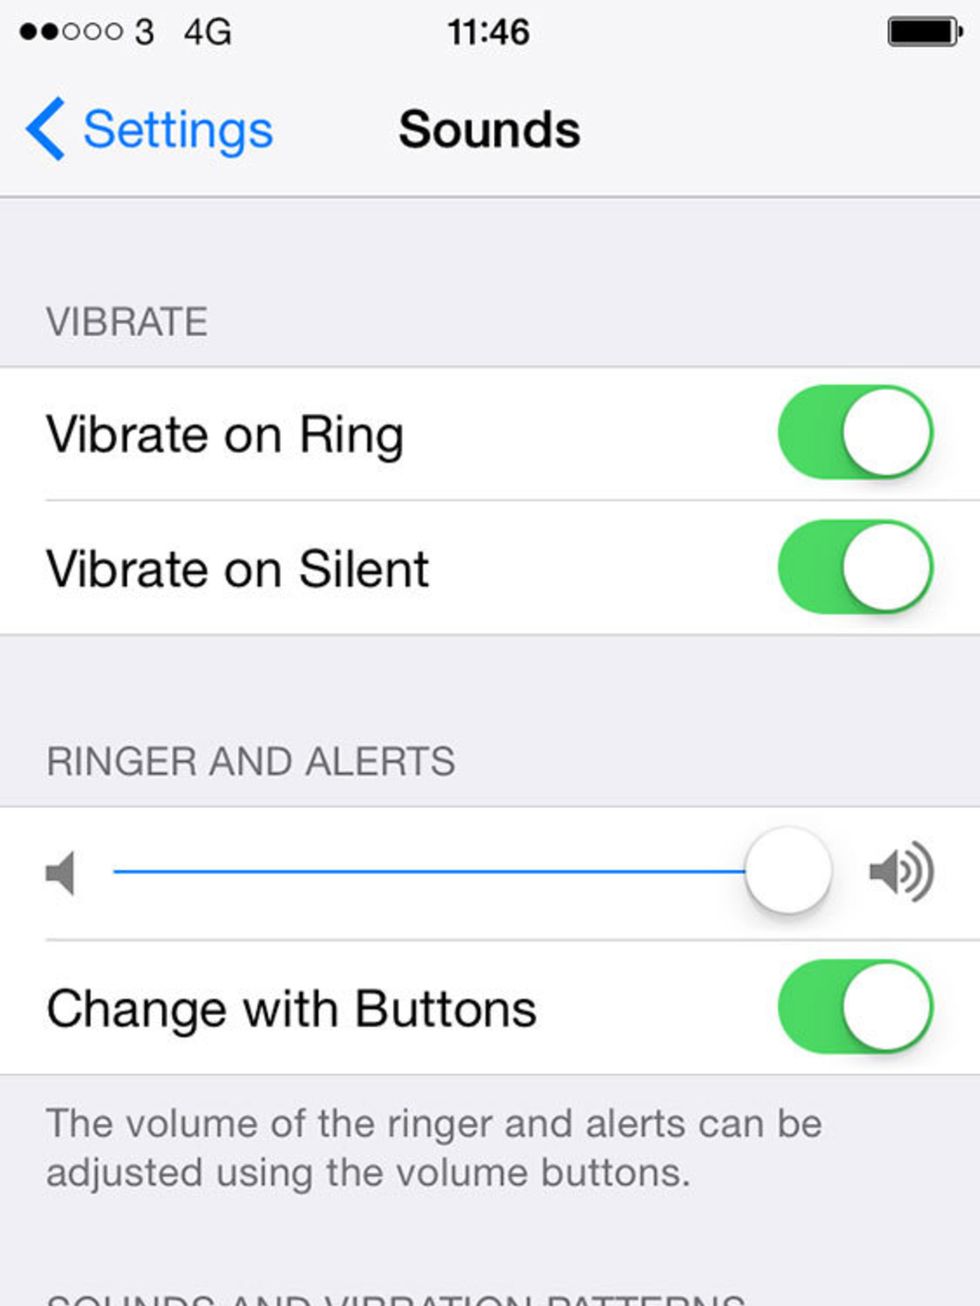 <p>2. Turn off vibrate</p>

<p>If you check your phone all the time or use the loud option, the chances are the vibrate is pretty useless to you anyway. Go to Settings &gt; Sounds &gt; Switch off Vibrate on Ring/Silent.</p>